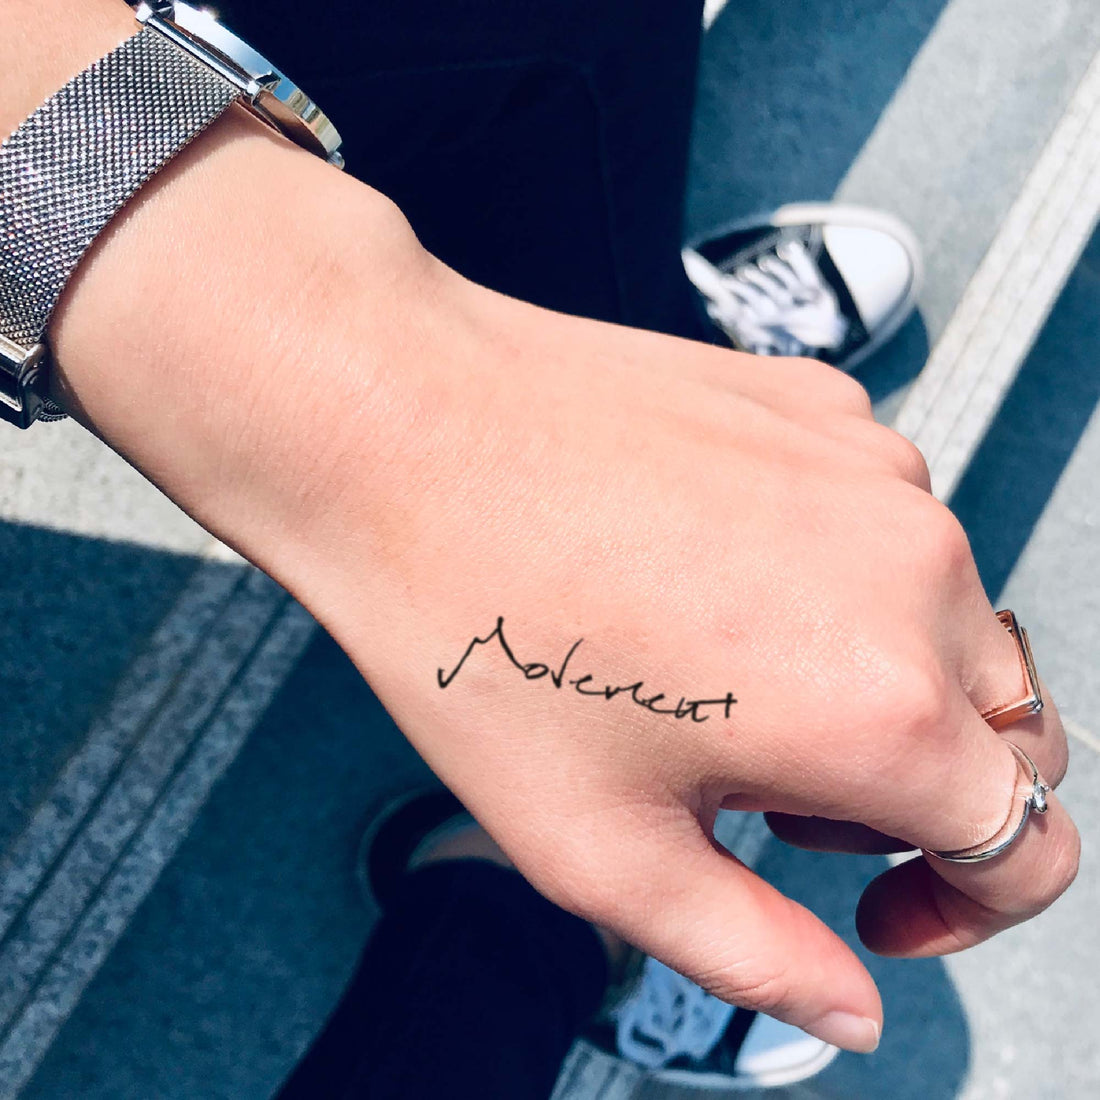 Movement custom temporary tattoo sticker design idea inspiration meanings removal arm wrist hand words font name signature calligraphy lyrics tour concert outfits merch accessory gift souvenir costumes wear dress up code